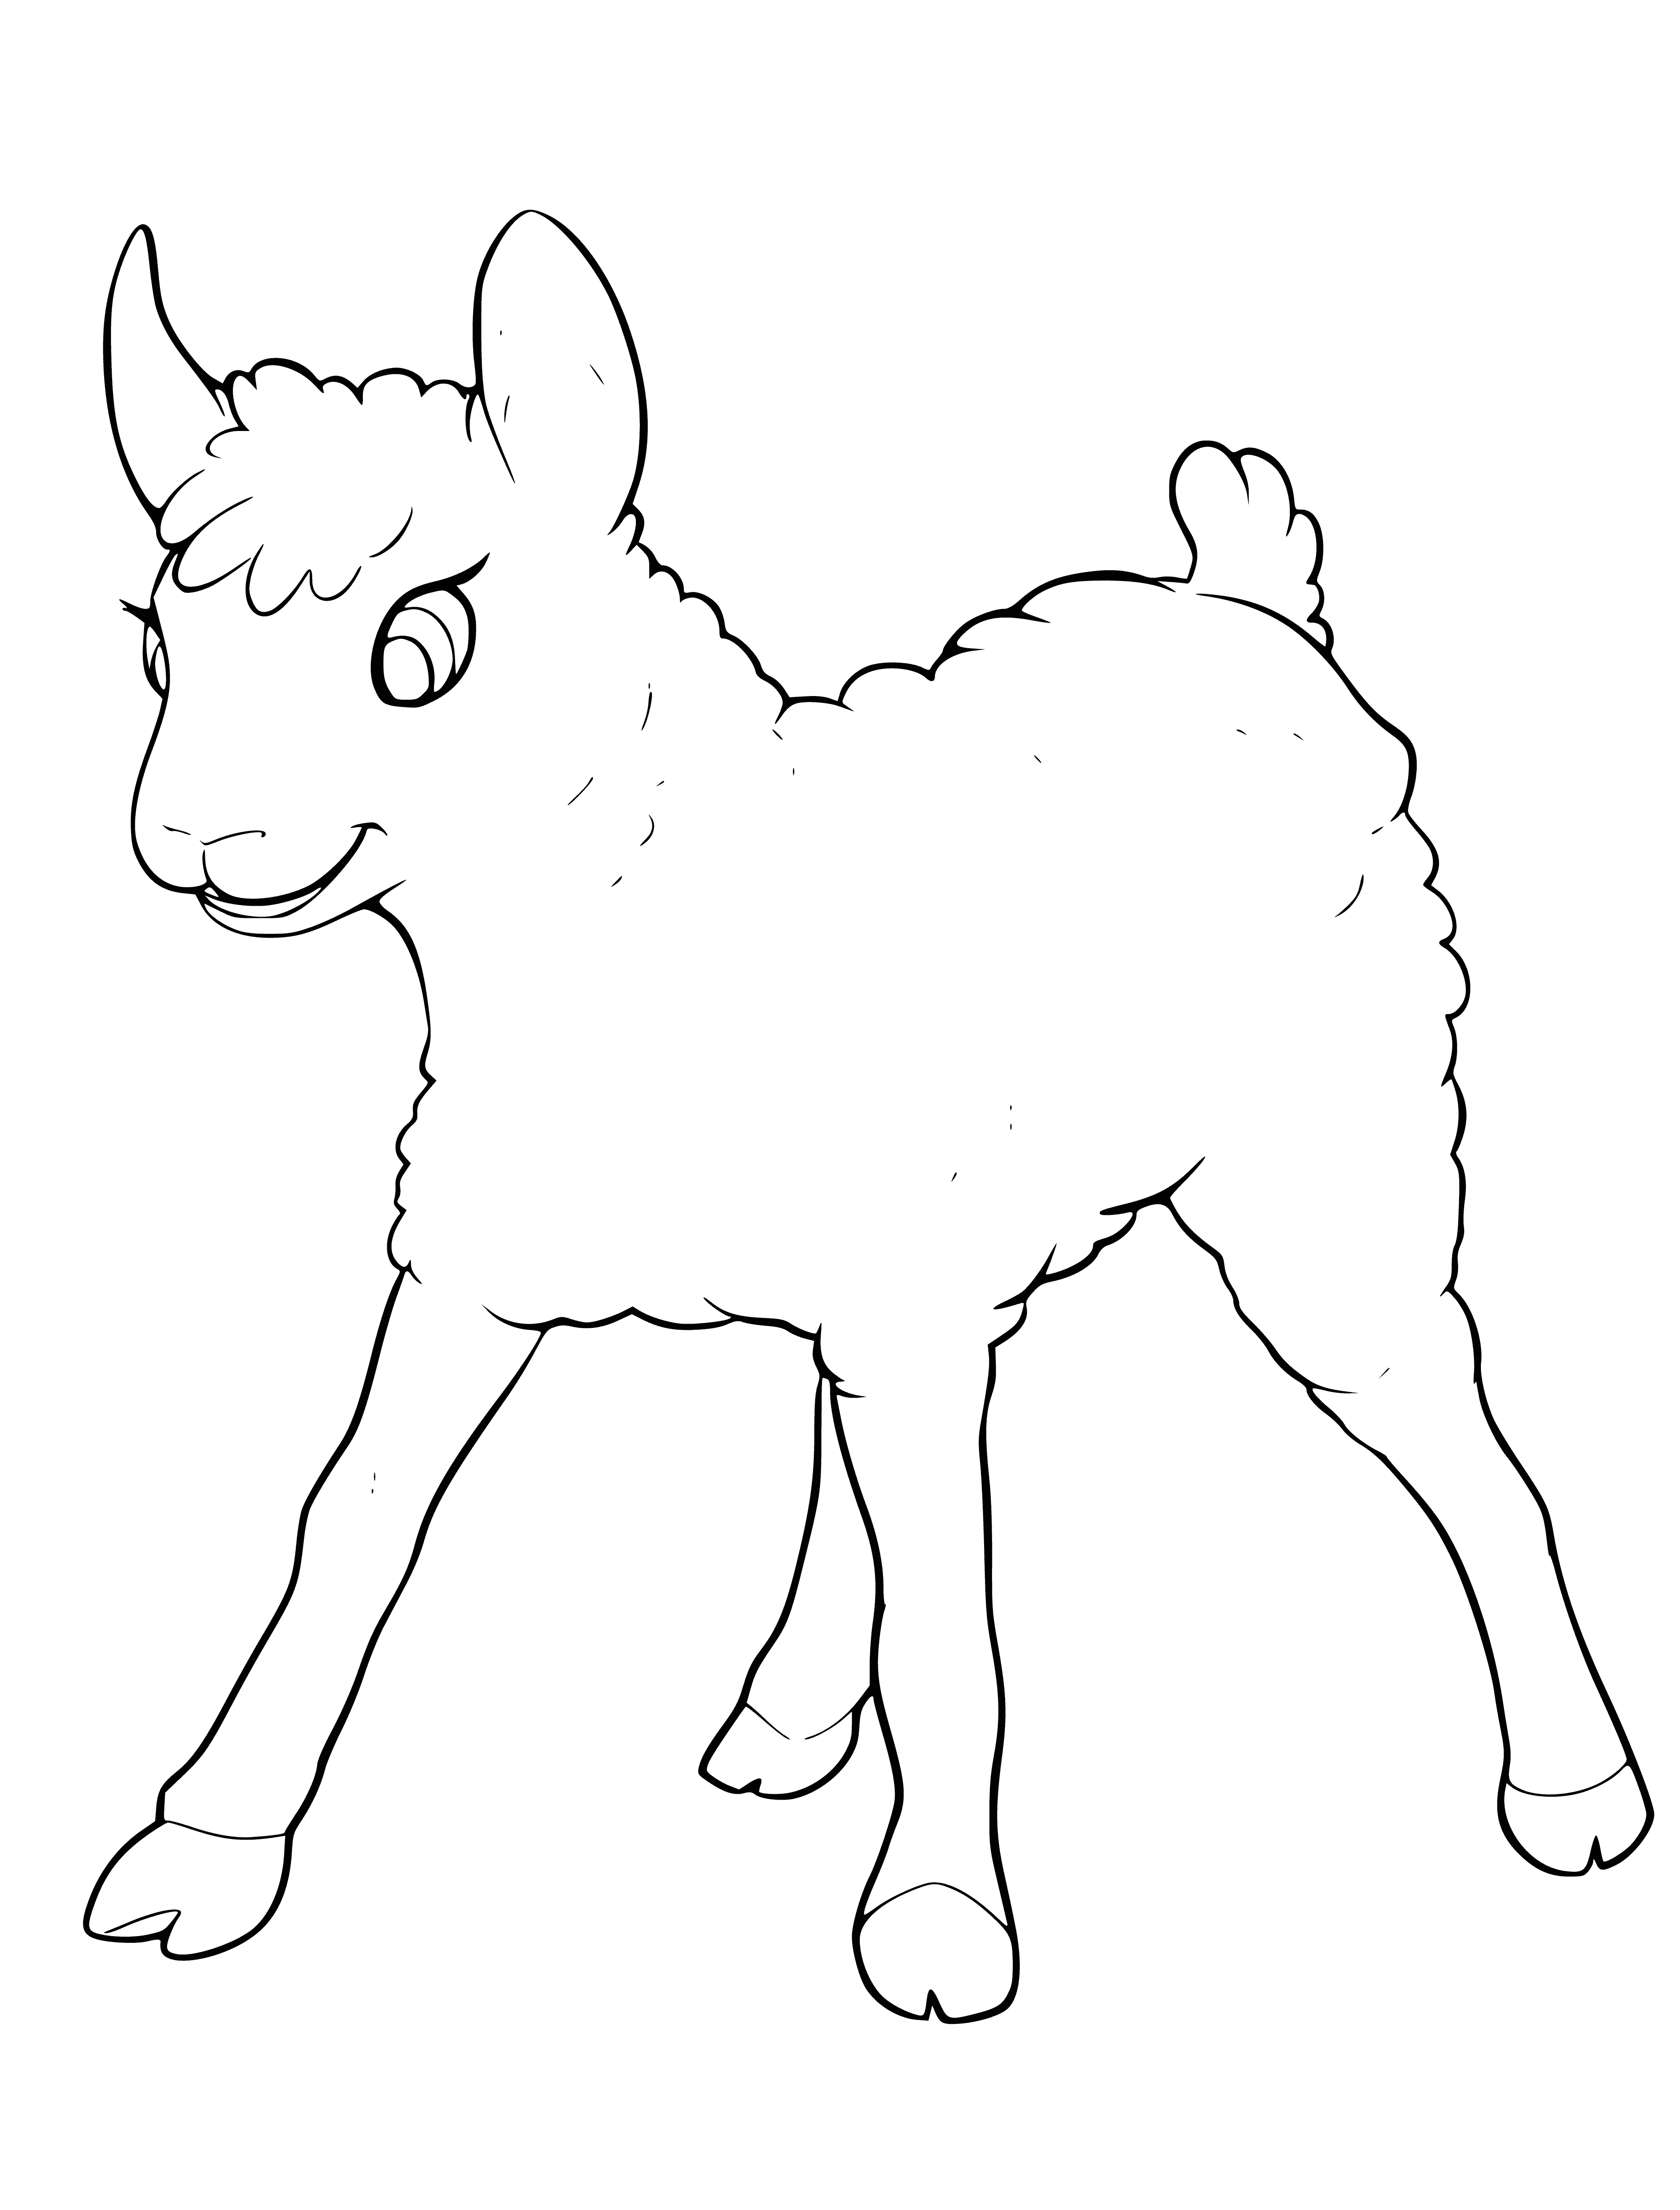 coloring page: A small white lamb stands in a field, with a black nose, hooves and a curling tail.